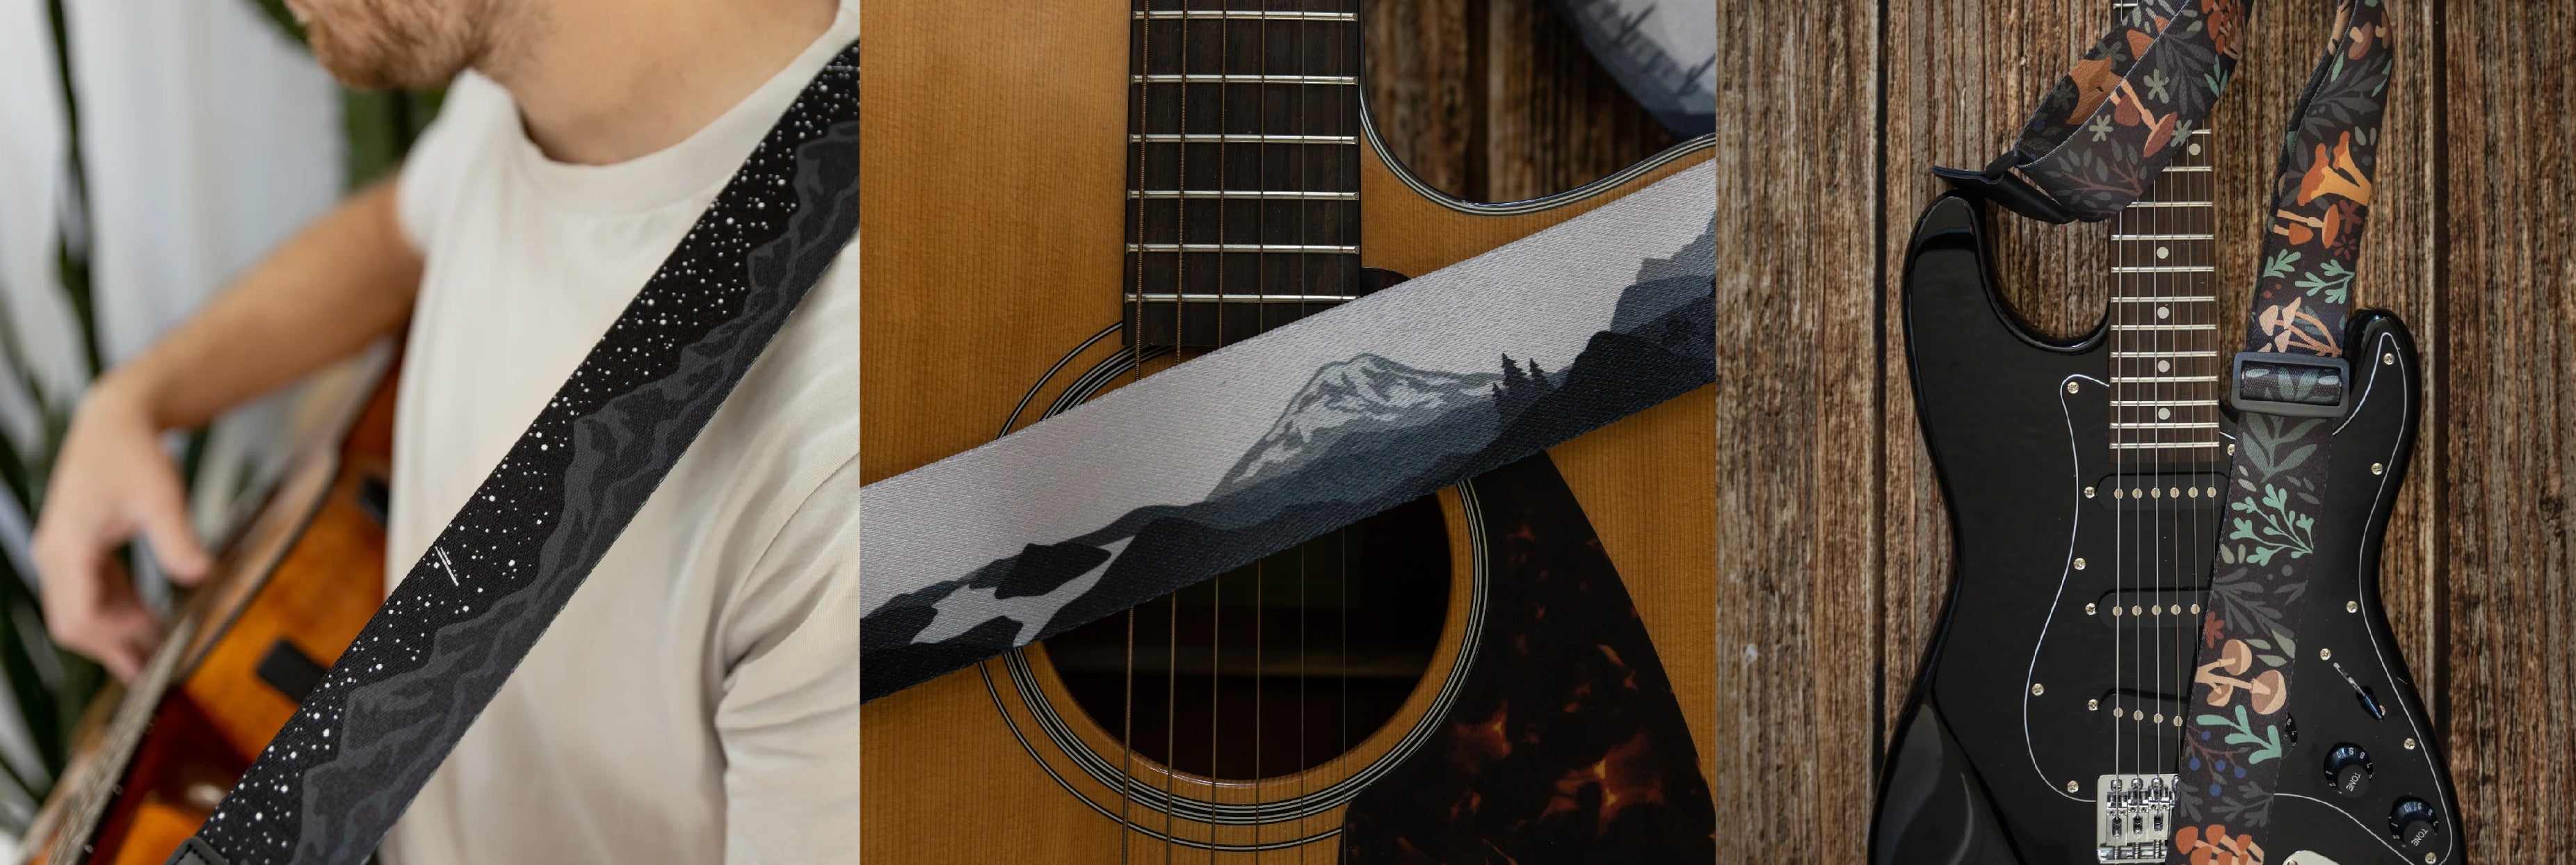 three iamges of unique designed guitar straps. Black guitar strap with mountains and stars. National park designed guitar strap in black and white. Forest foliage guitar strap designed with mushrooms and other plant life